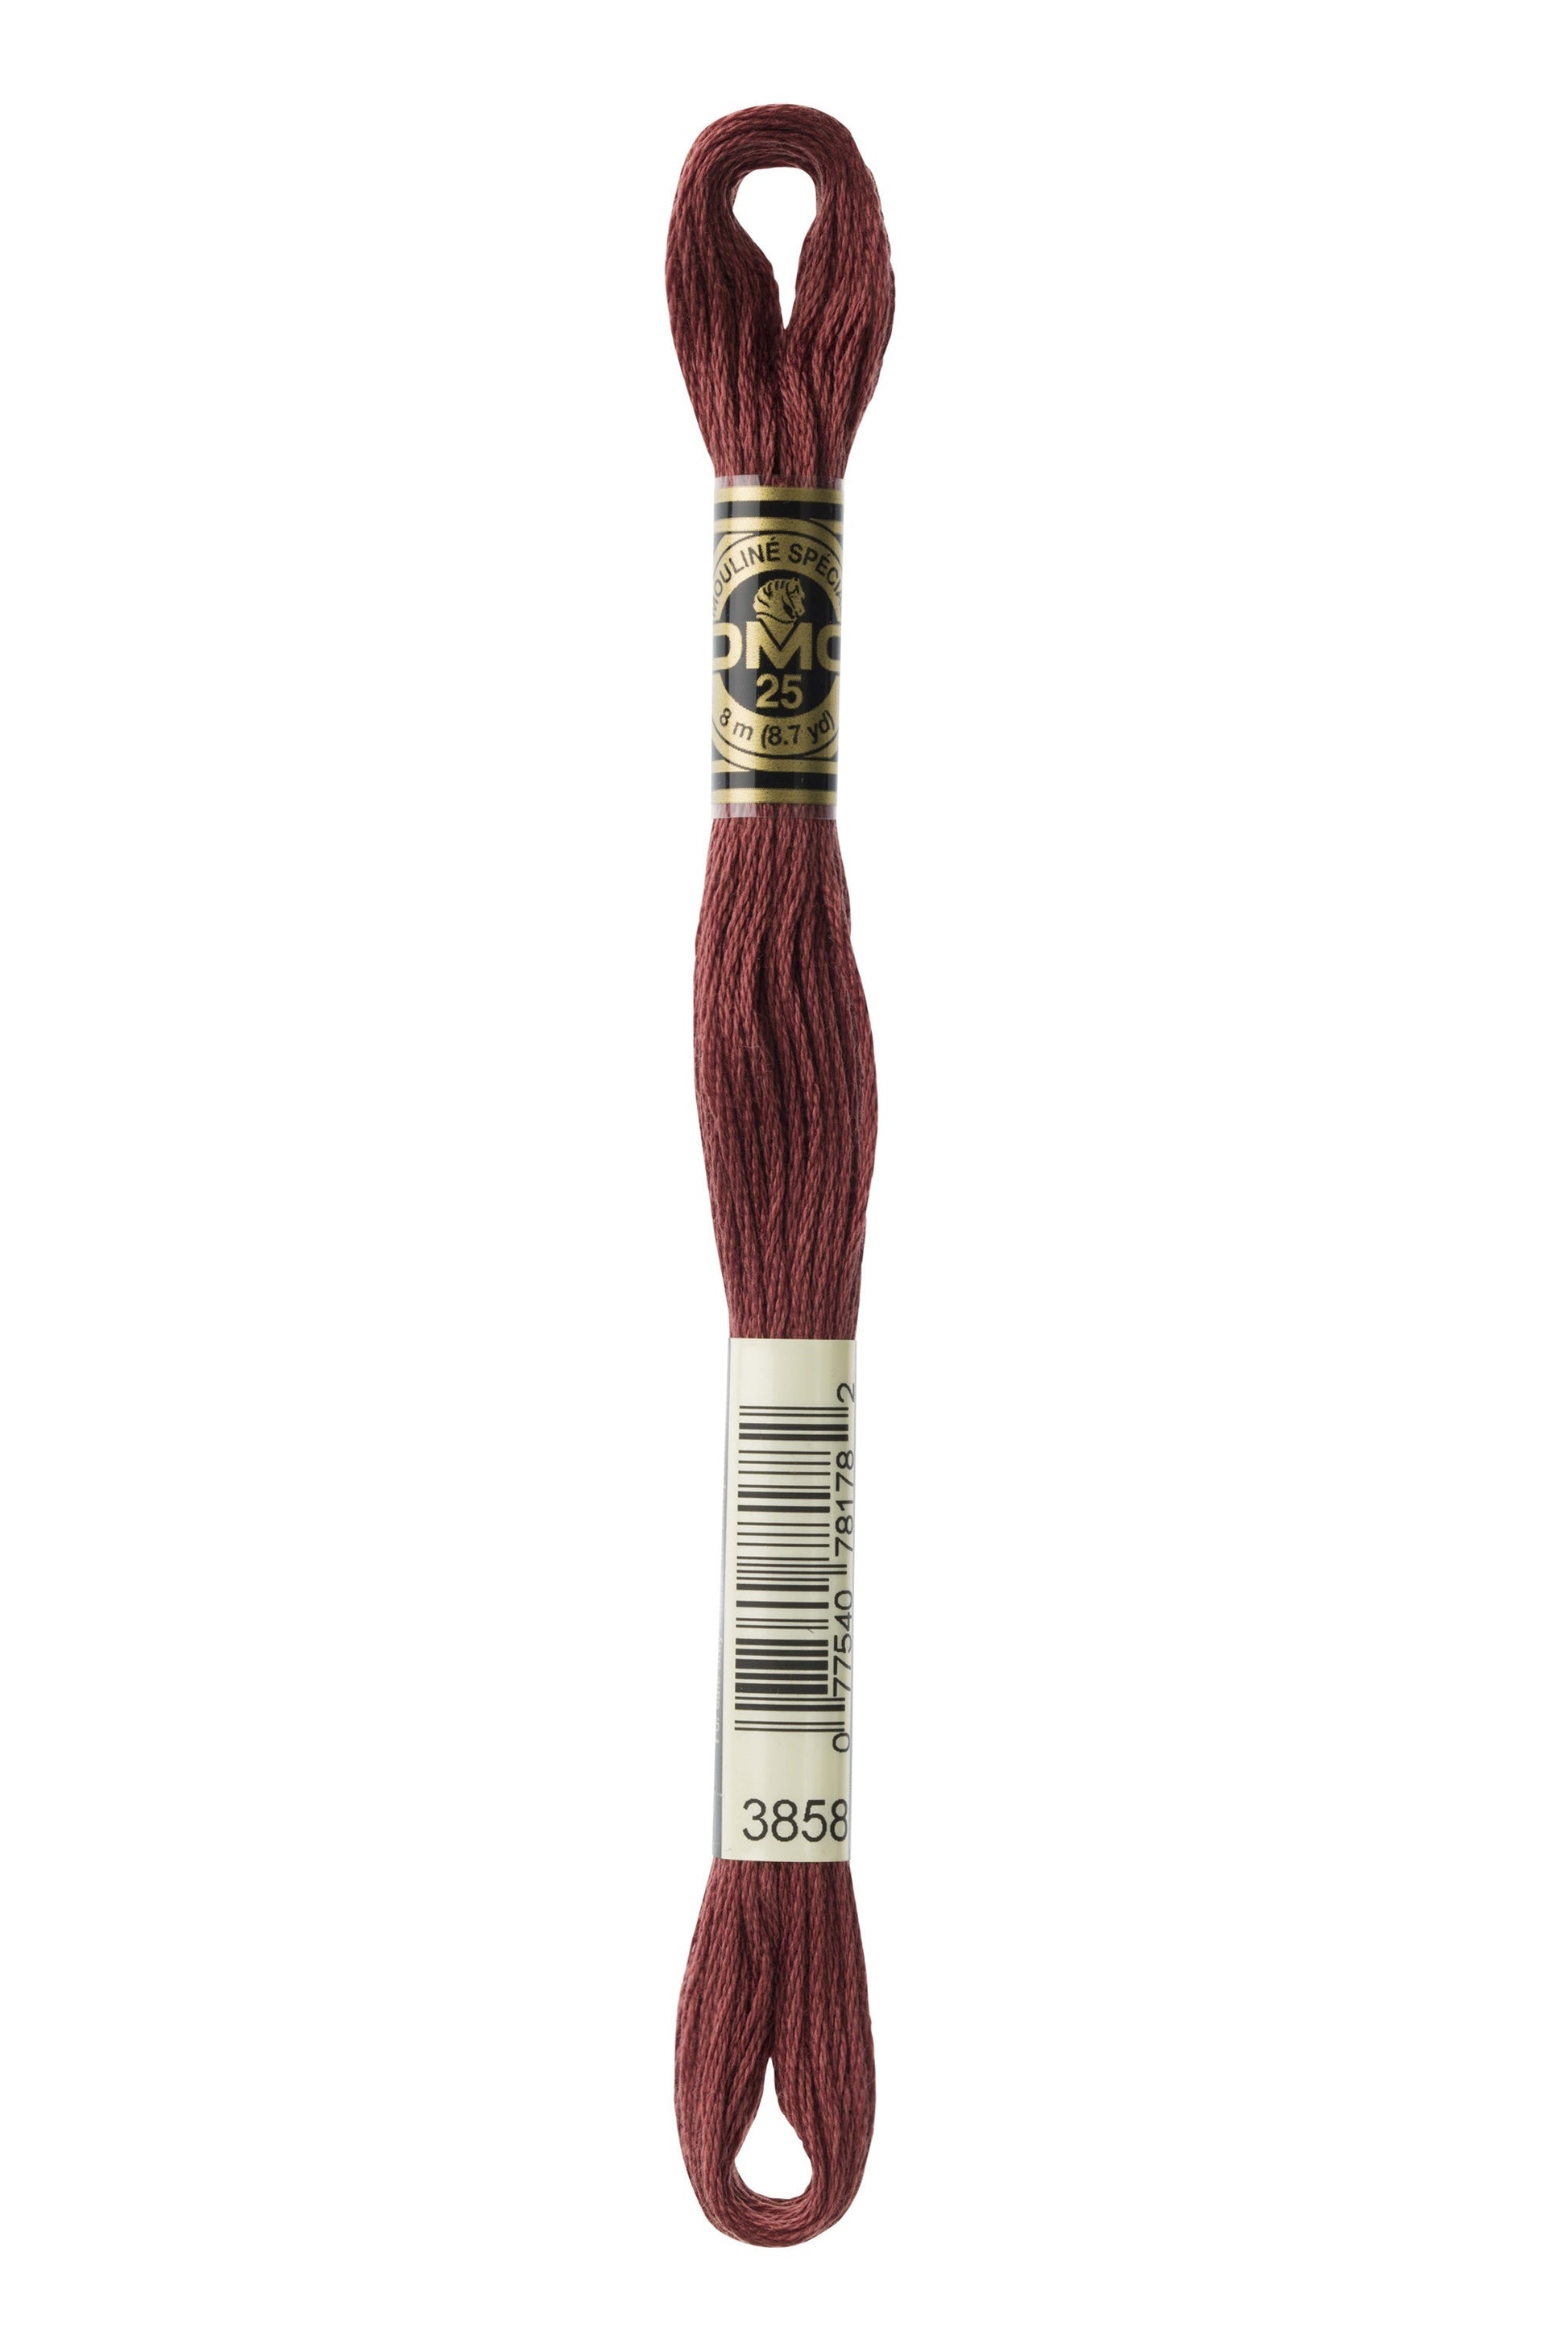 Six-Strand Embroidery Floss - 3858 (Rose Brown)-Embroidery Thread-Wild and Woolly Yarns